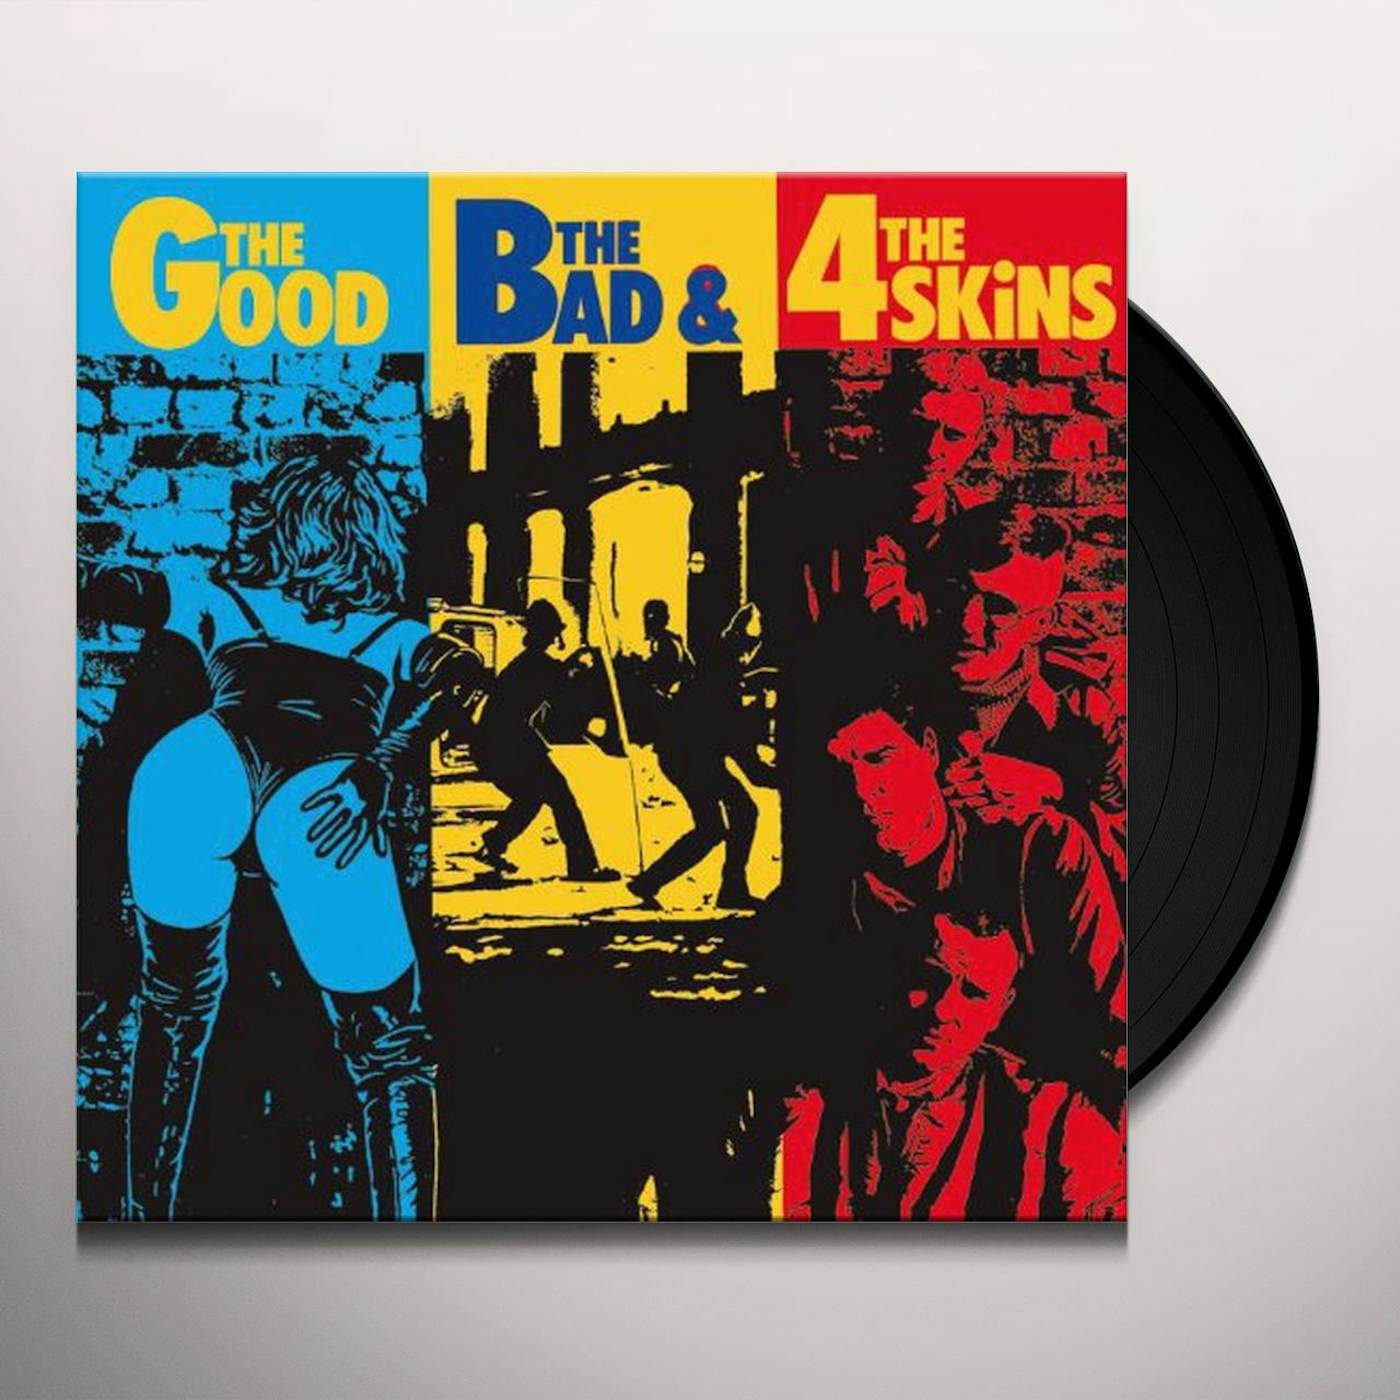 GOOD THE BAD & THE 4 SKINS Vinyl Record